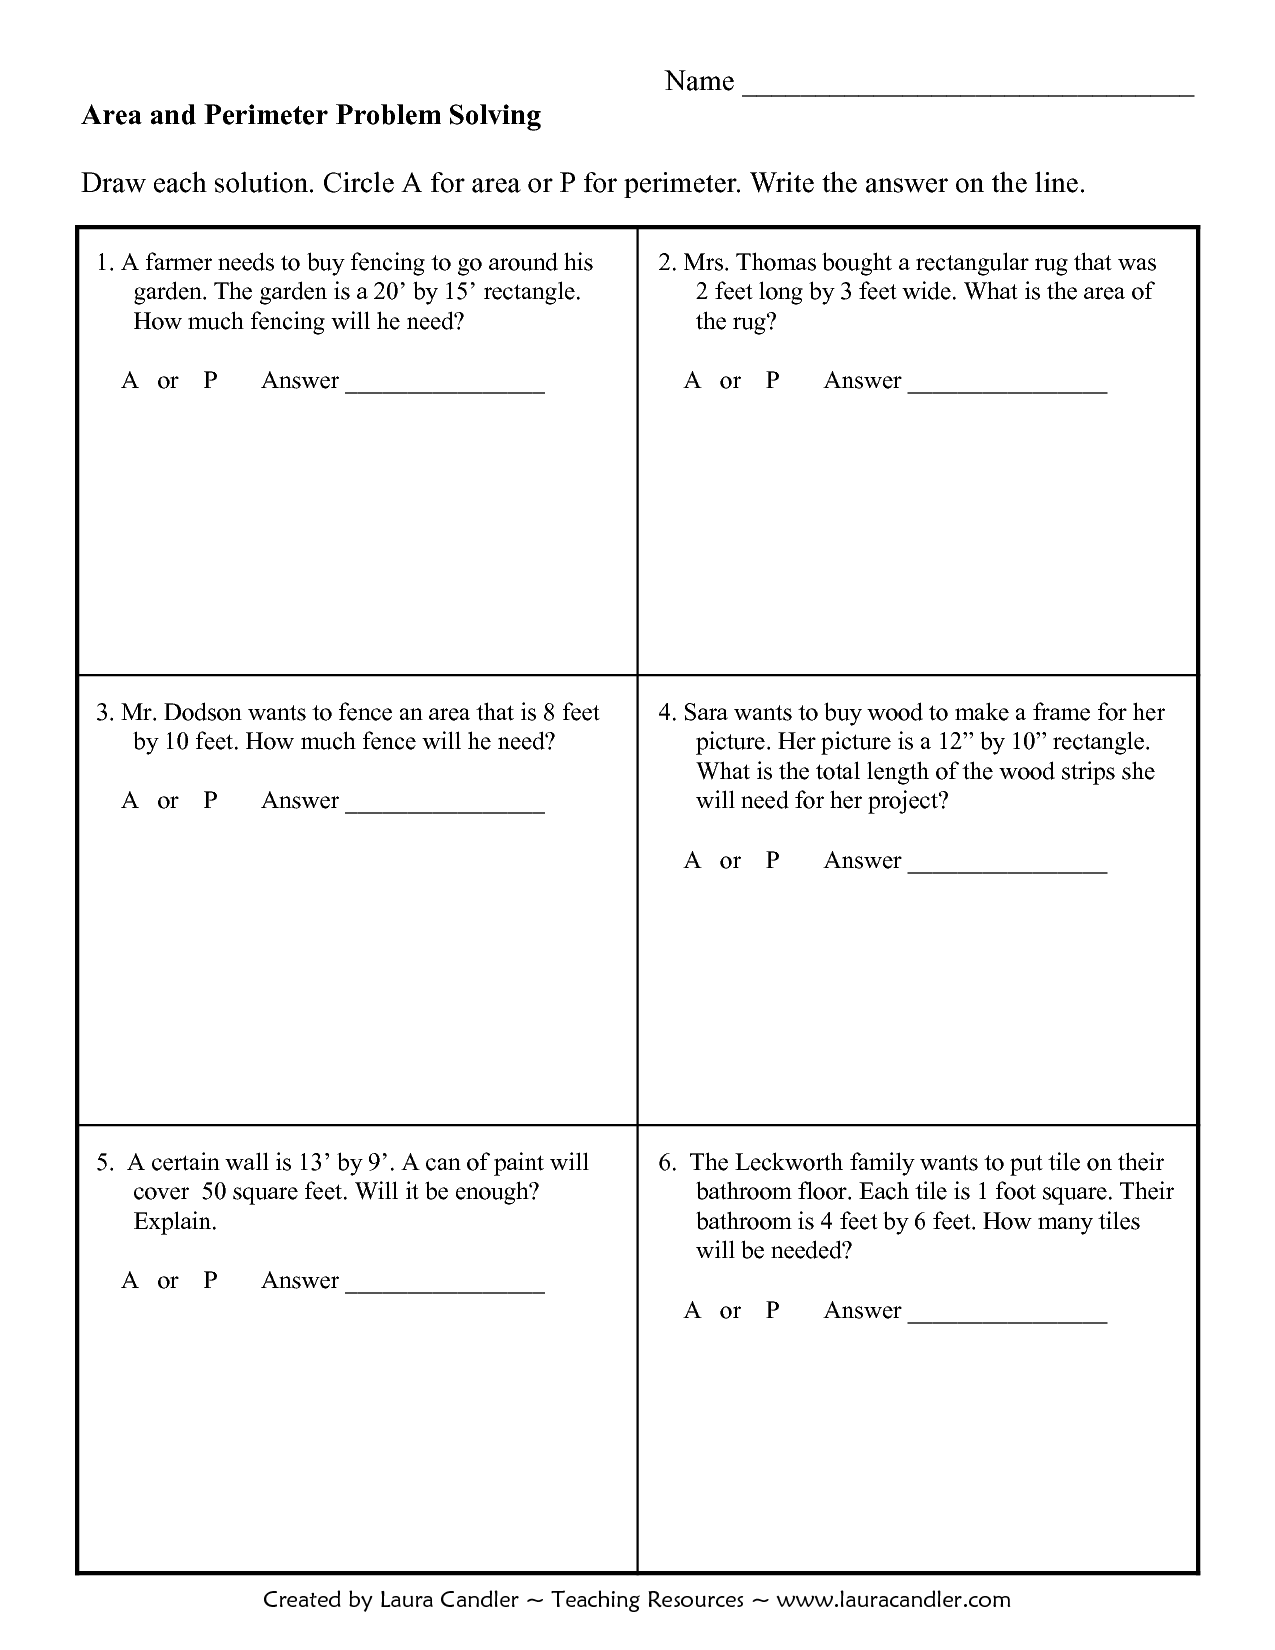 problem solving questions for year 7